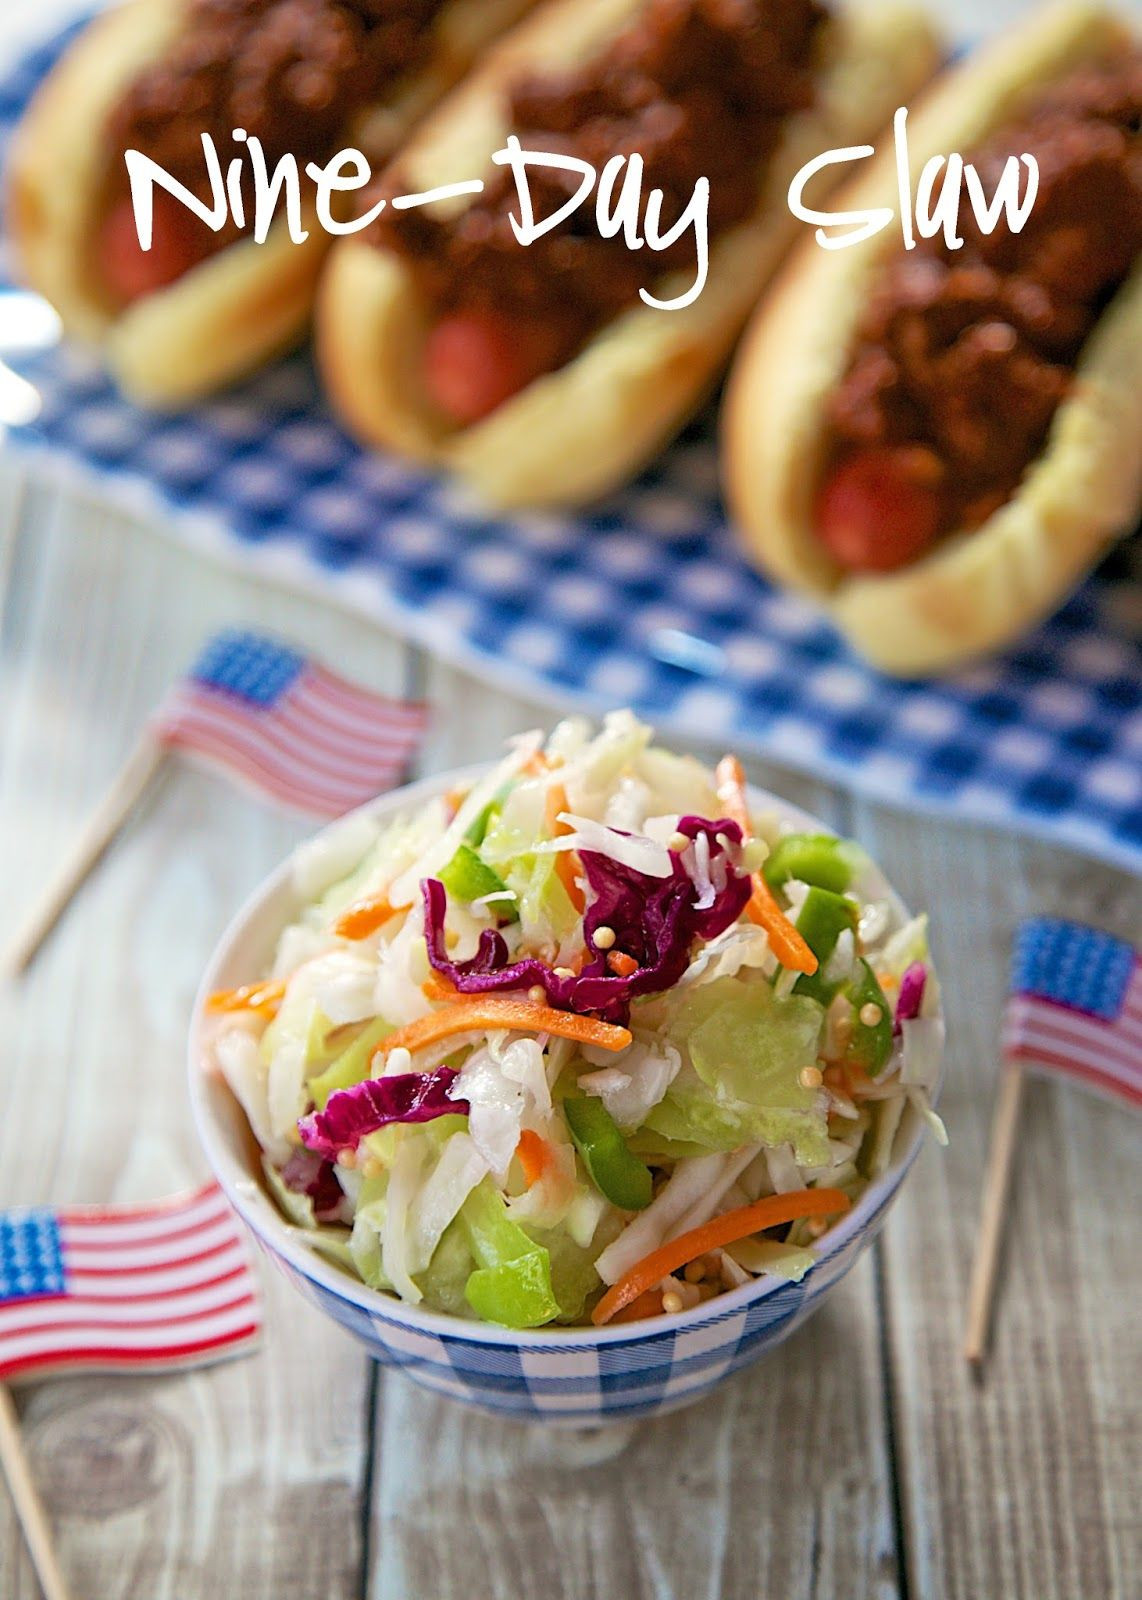 Good Side Dishes For A Cookout
 Nine Day Slaw Recipe great make AHEAD 9 days side